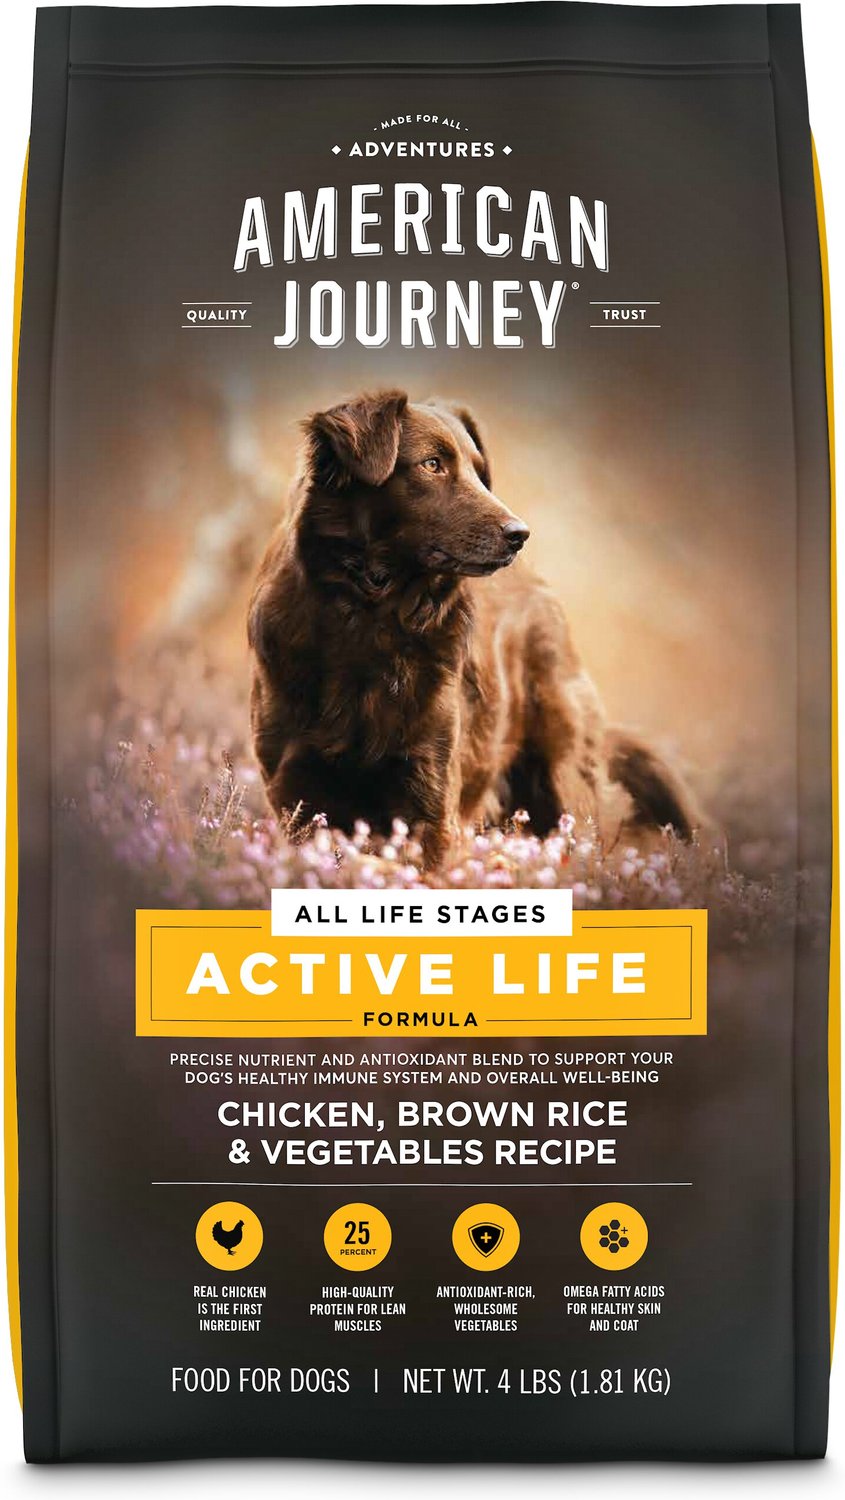 American Journey Active Life Formula Chicken, Brown Rice & Vegetables Recipe Dry Dog Food